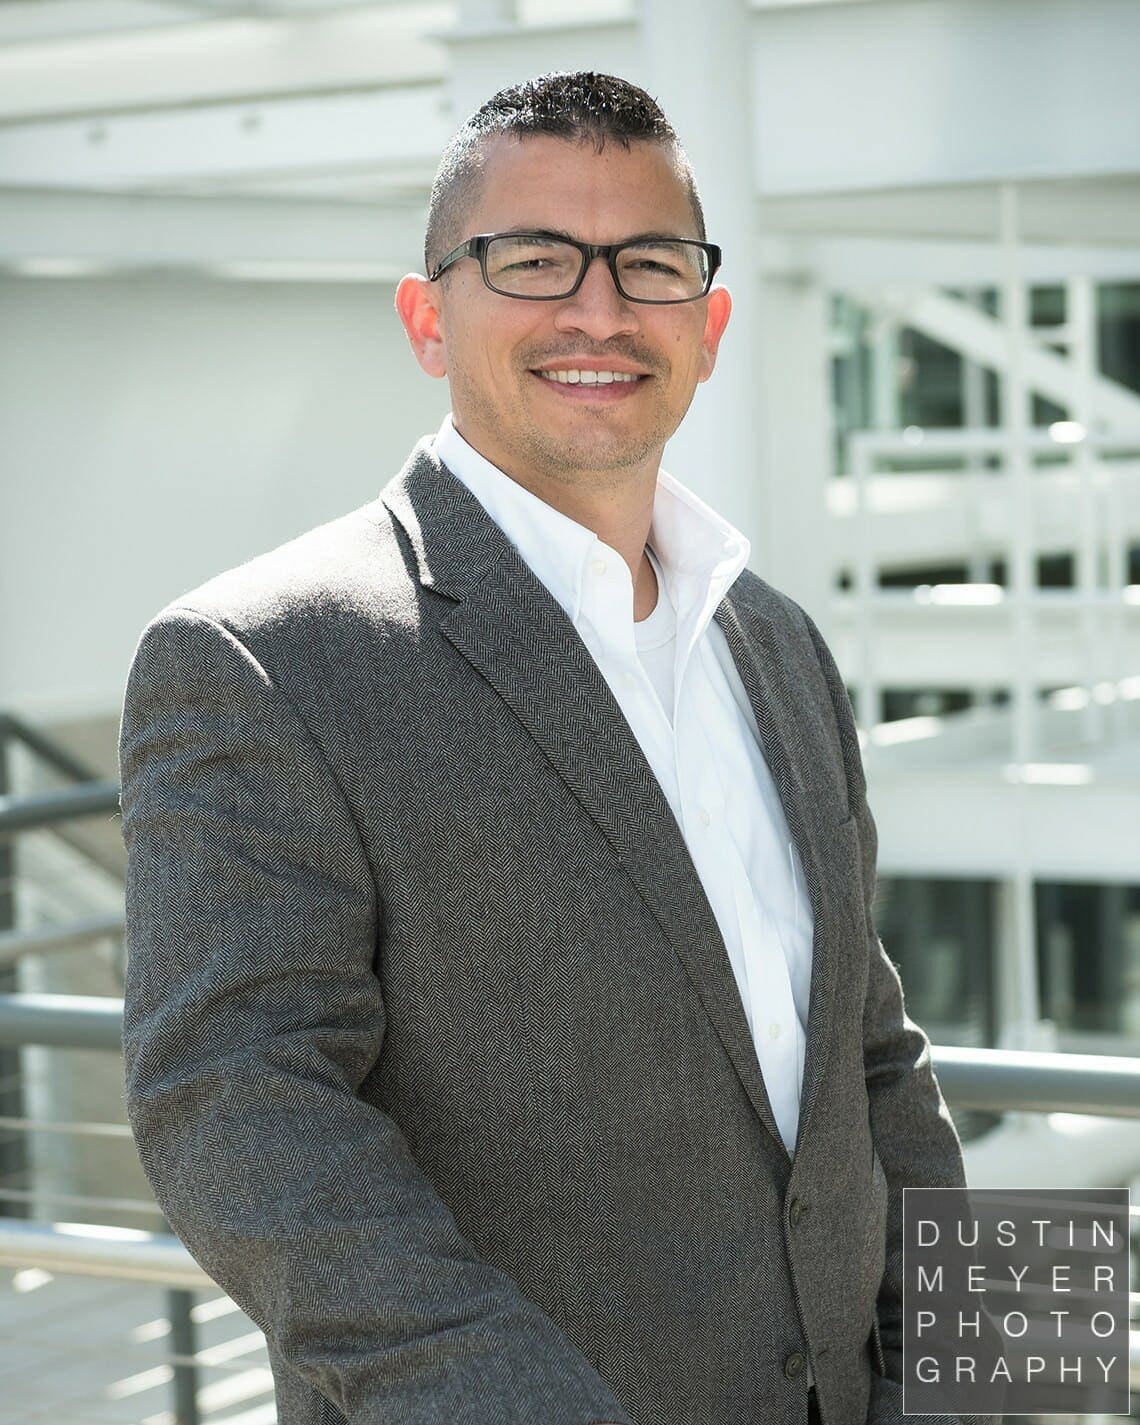 professional headshot tips male business headshot glasses and gray suit outdoors industrial modern contemporary headshots